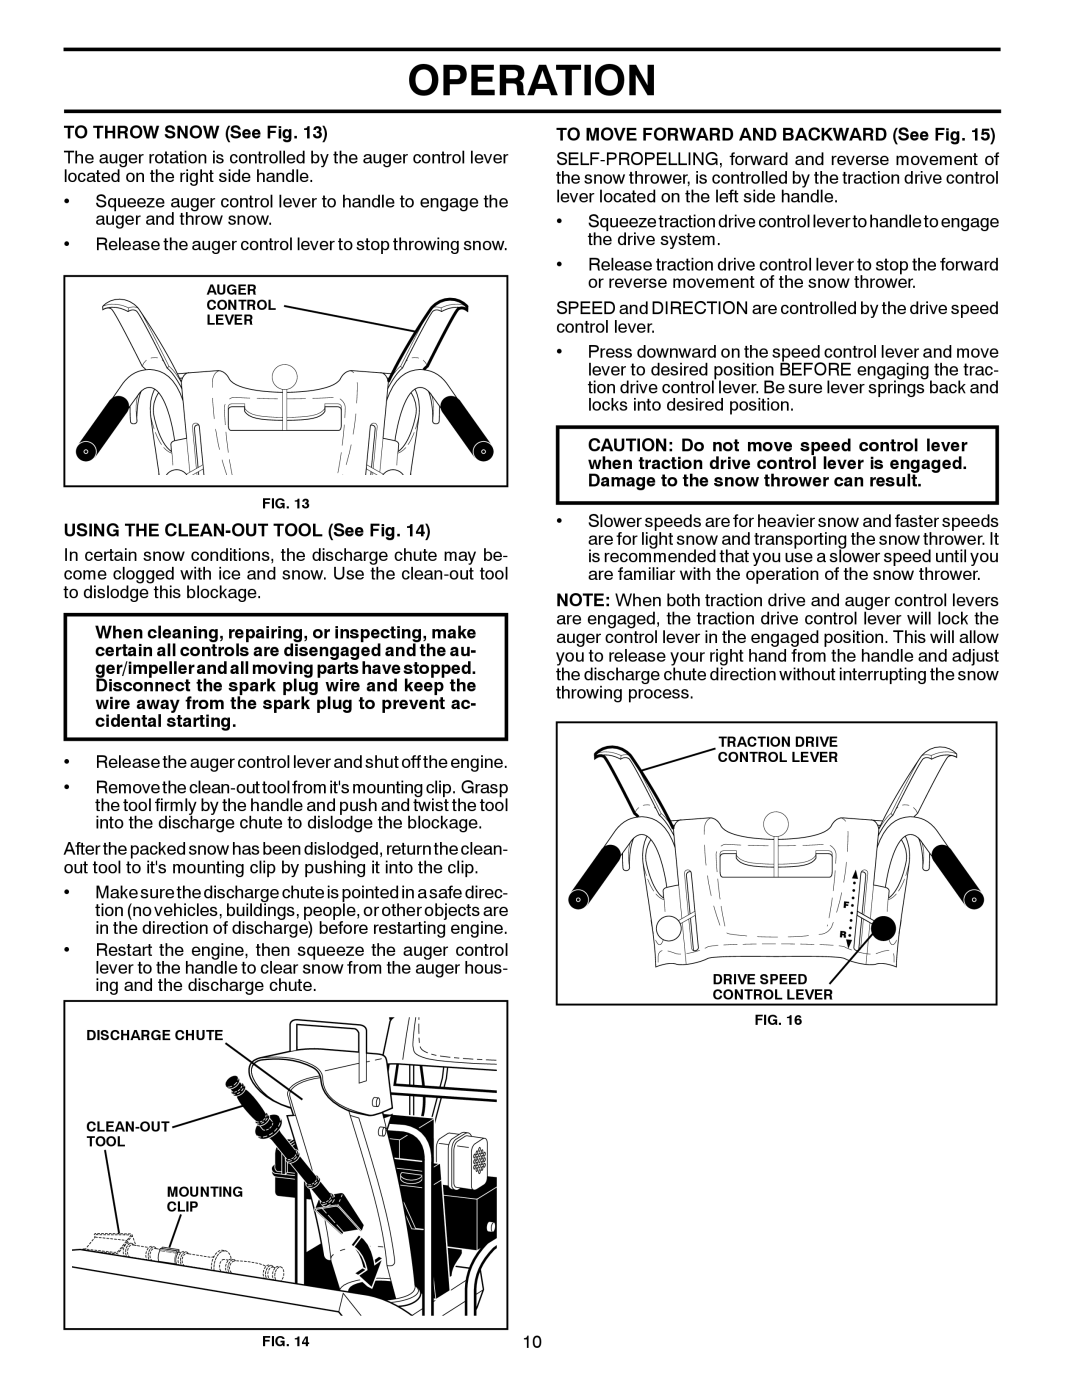 McCulloch 96192004102 owner manual Operation, TO THROW SNOW See Fig, USING THE CLEAN-OUT TOOL See Fig 